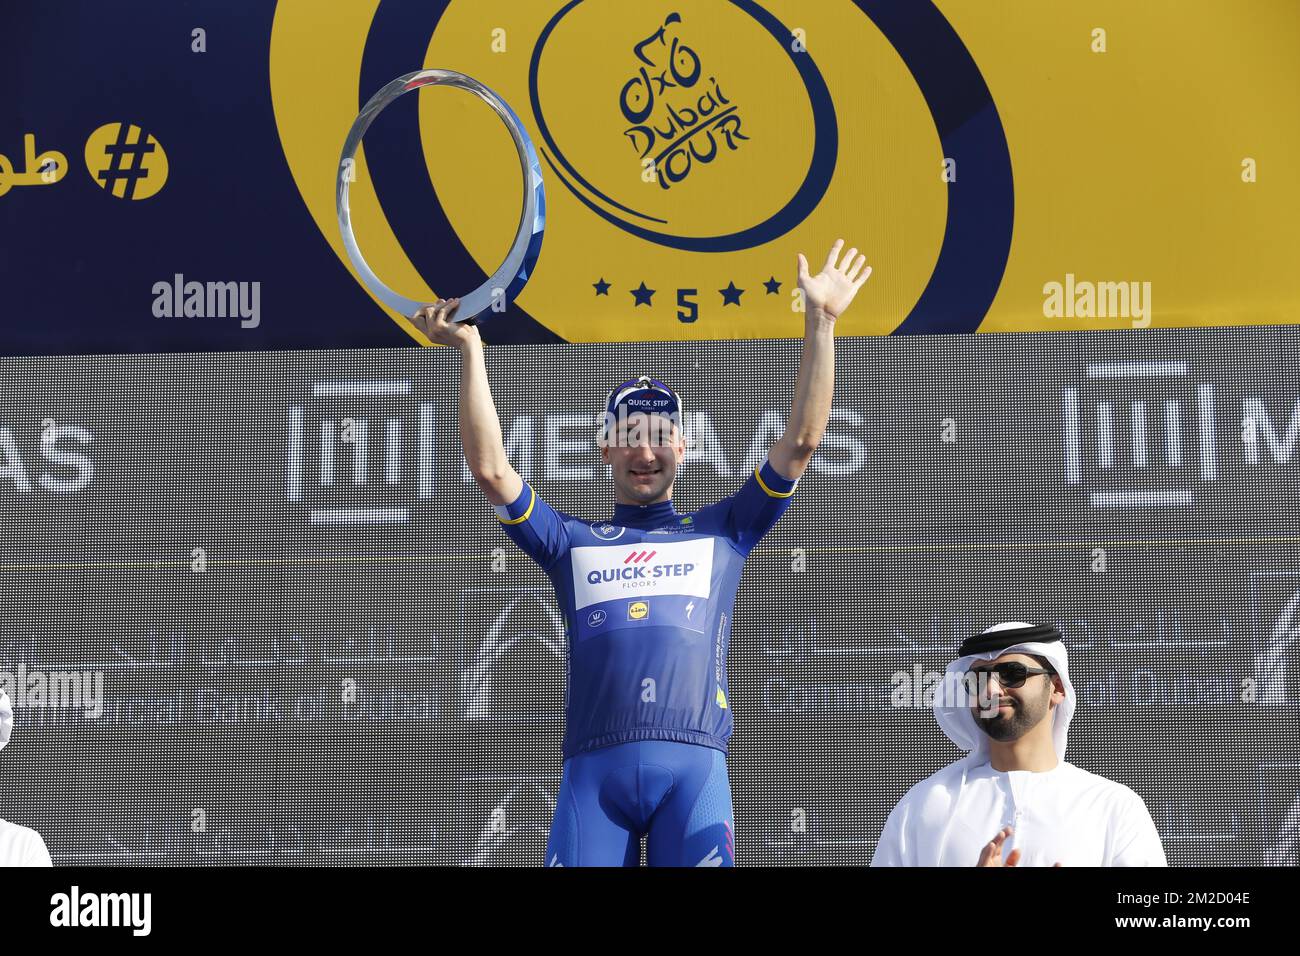 Italian Elia Viviani of Quick-Step Floors celebrates on the podium as winner of the General Classification after the fifth and last stage of the Dubai Tour 2018 cycling race, 129 km from the Skydive and the city WAlk in Dubai, United Arab Emirates, Saturday 10 February 2018. The Dubai Tour 2018 is taking place from 6 to 10 February. BELGA PHOTO YUZURU SUNADA Stock Photo